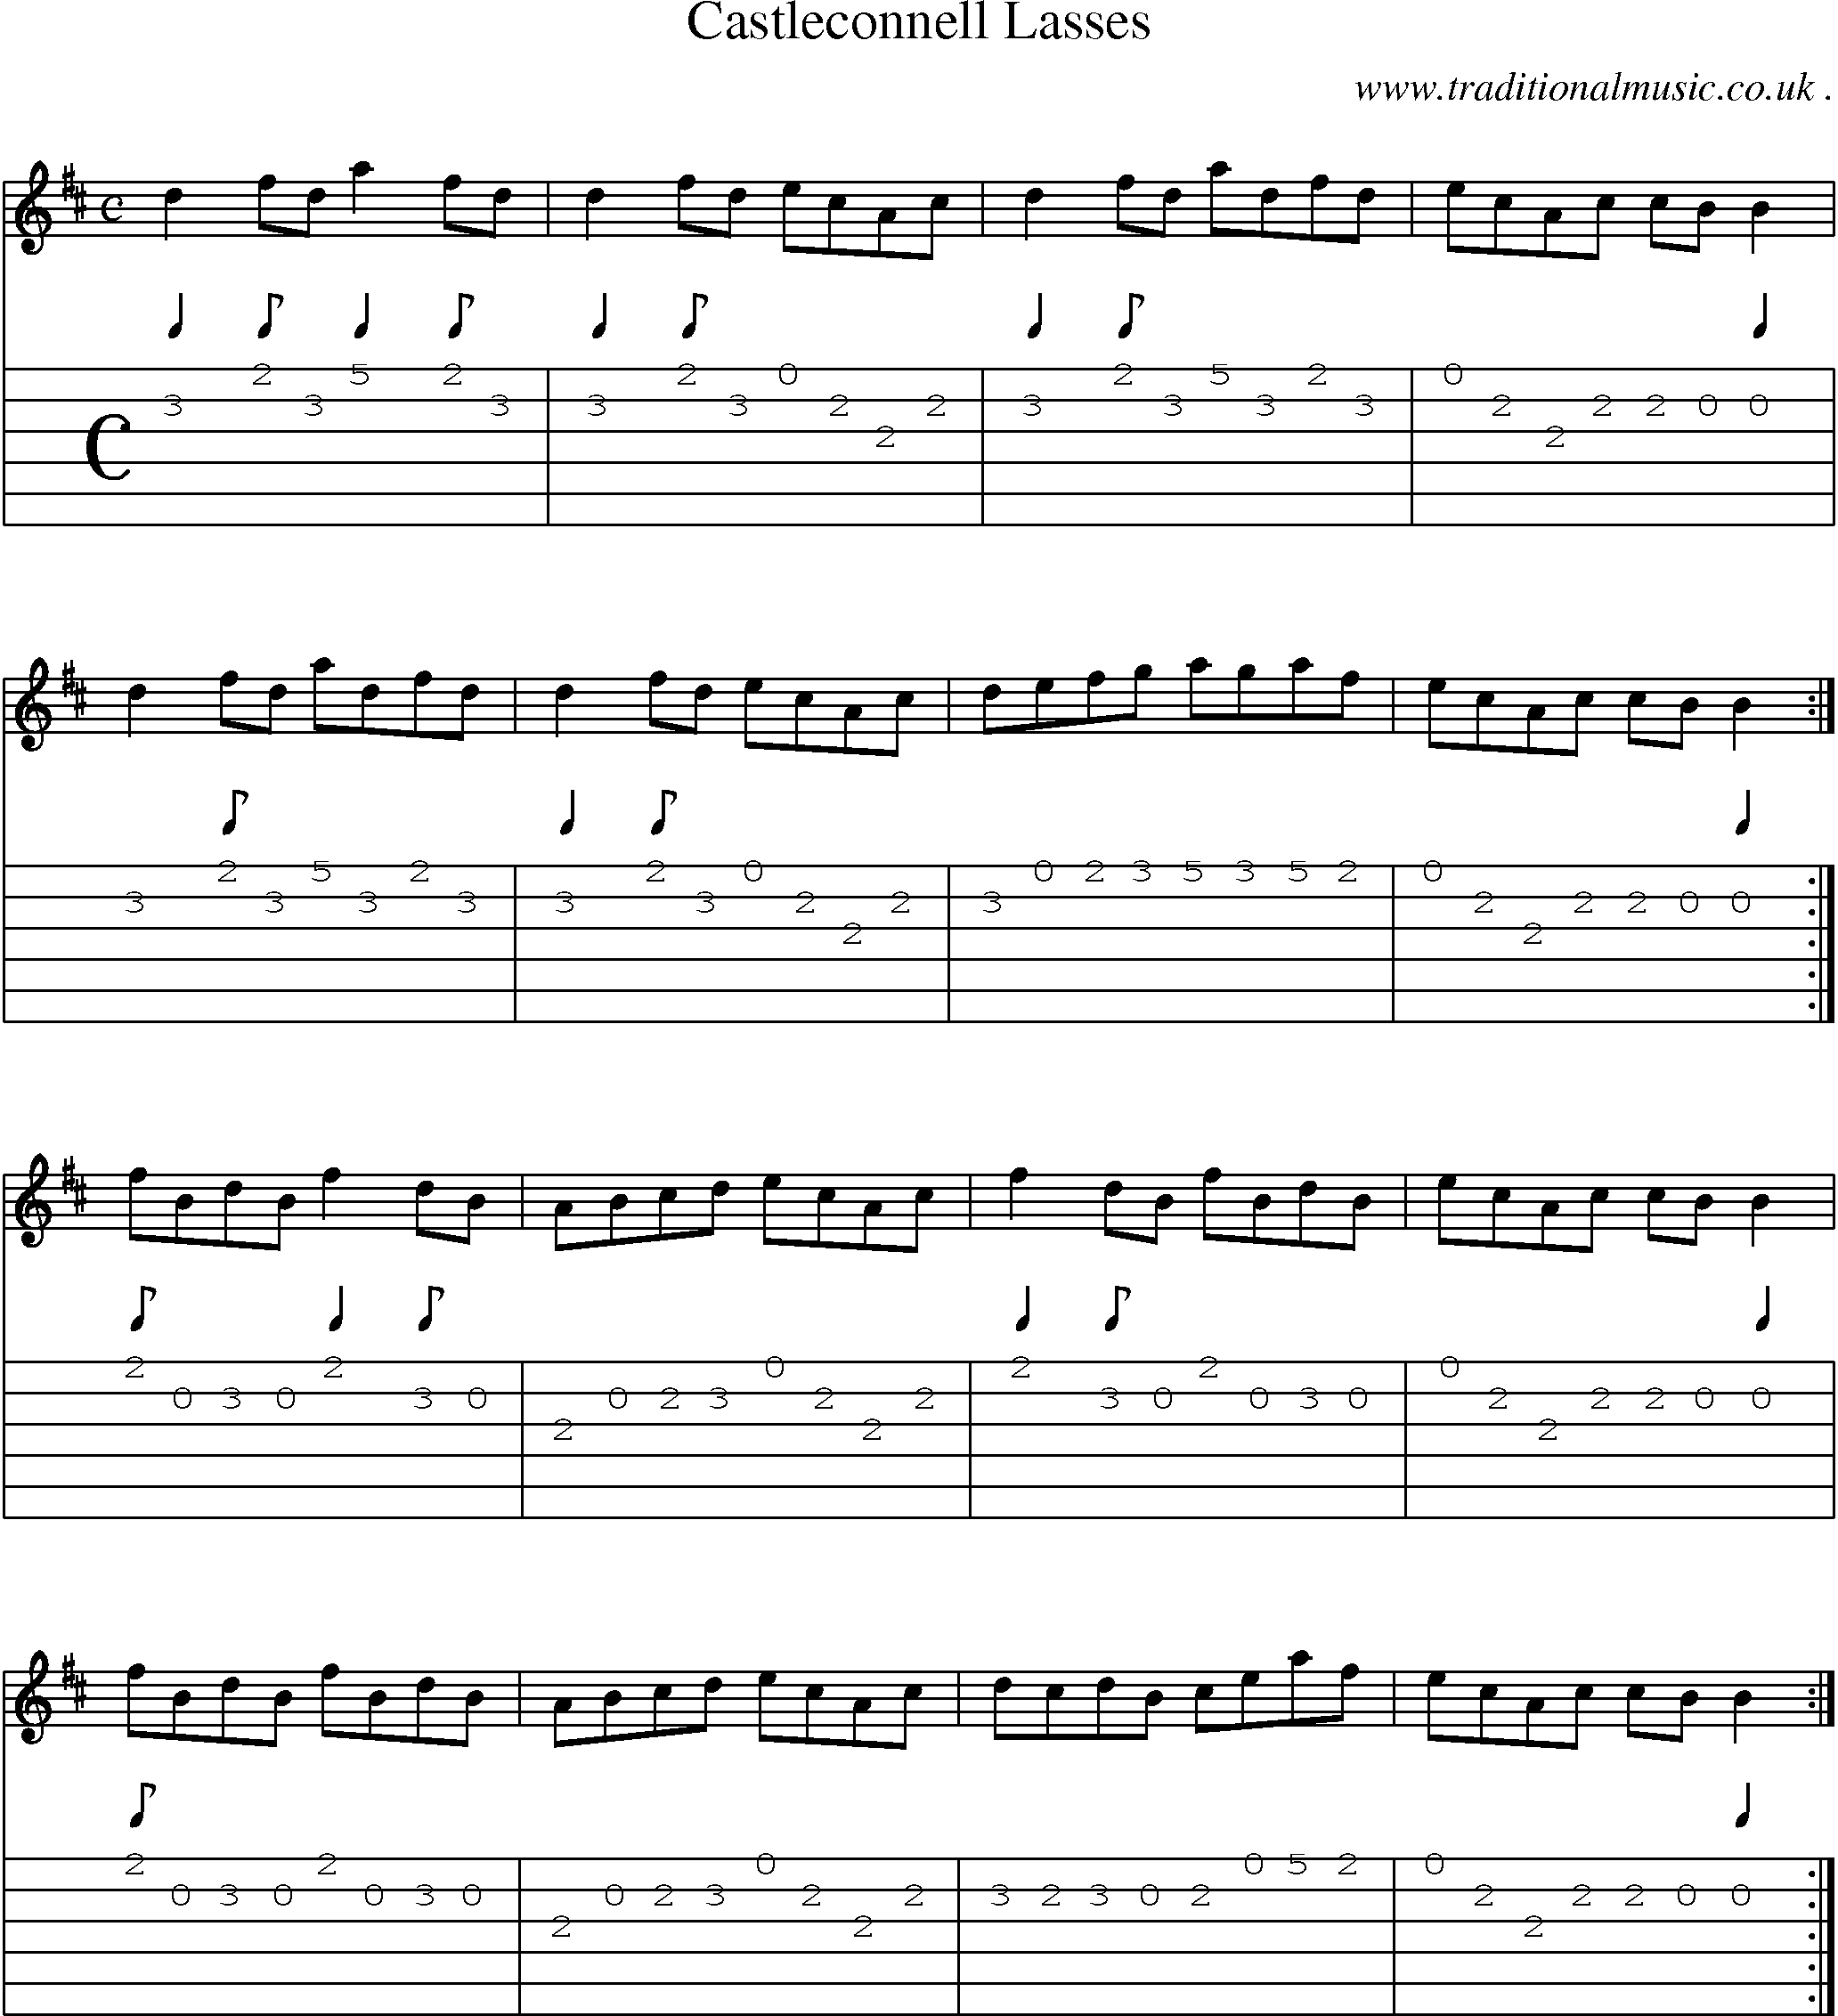 Sheet-Music and Guitar Tabs for Castleconnell Lasses